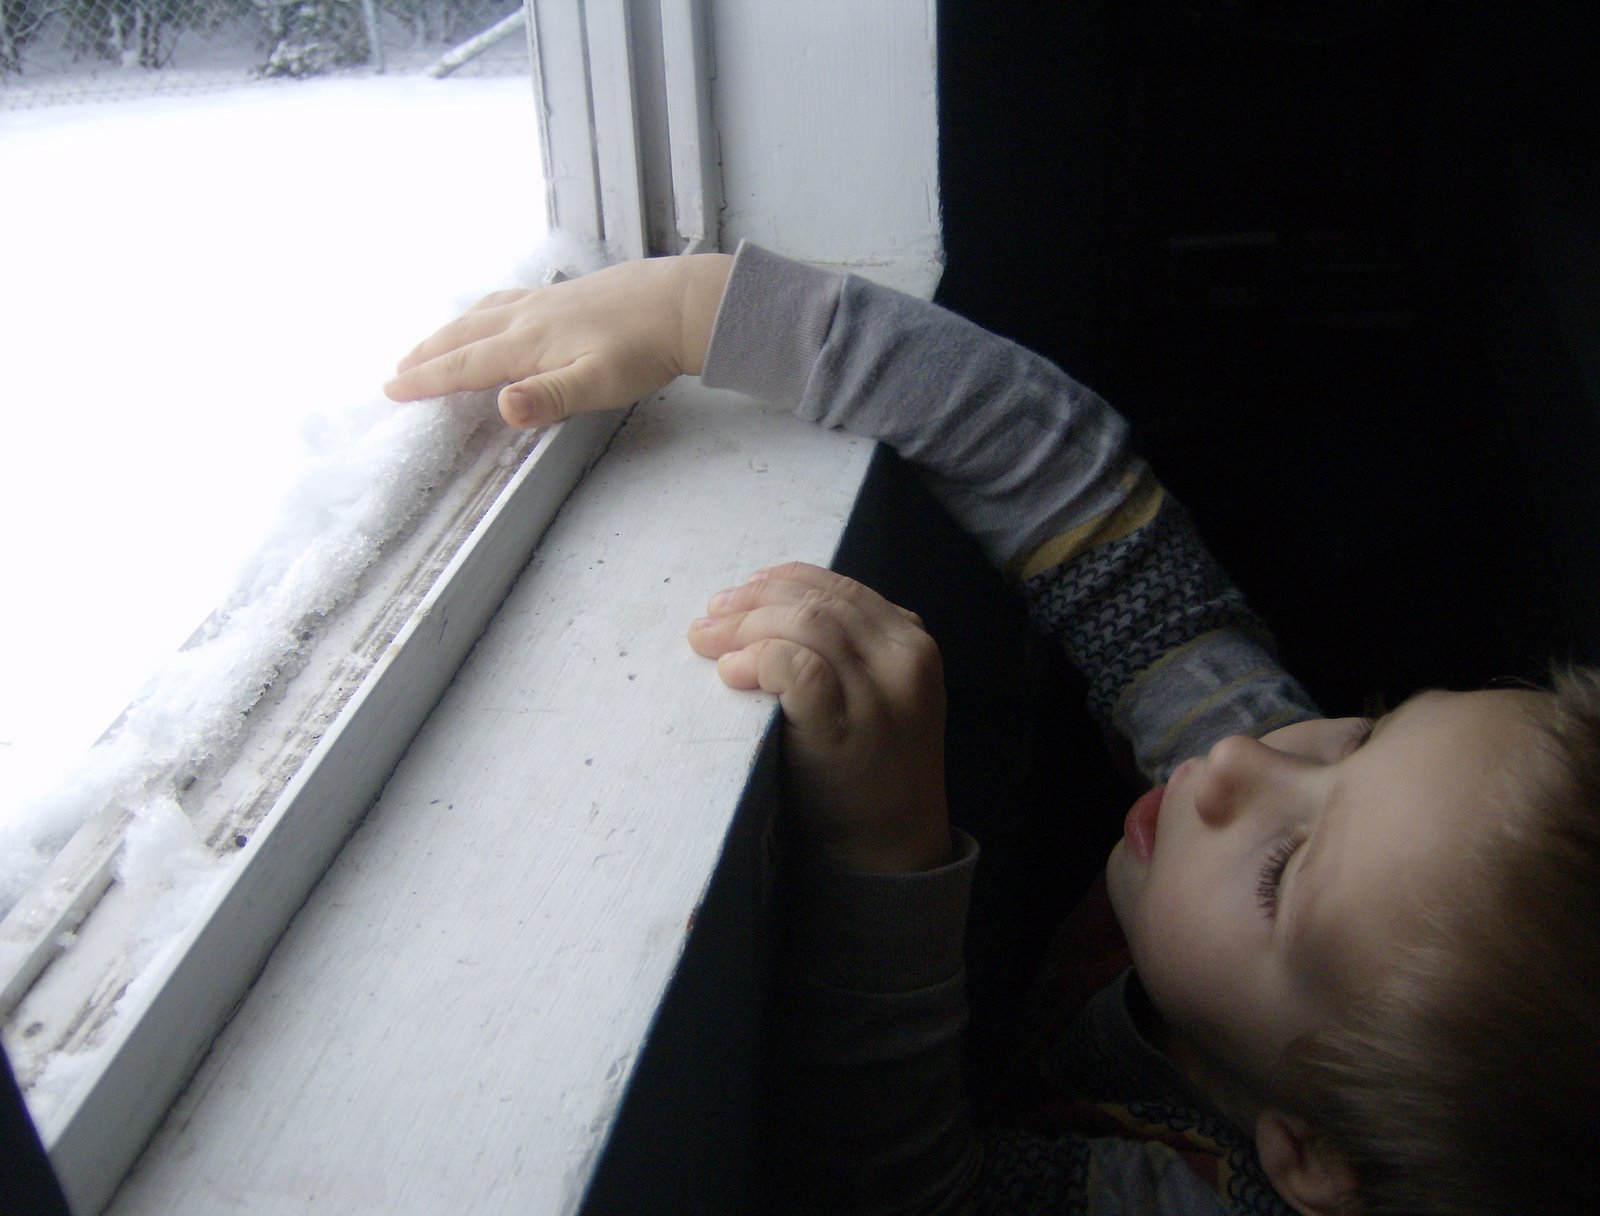 [Playing+with+snow+on+window+02-01+009.jpg]